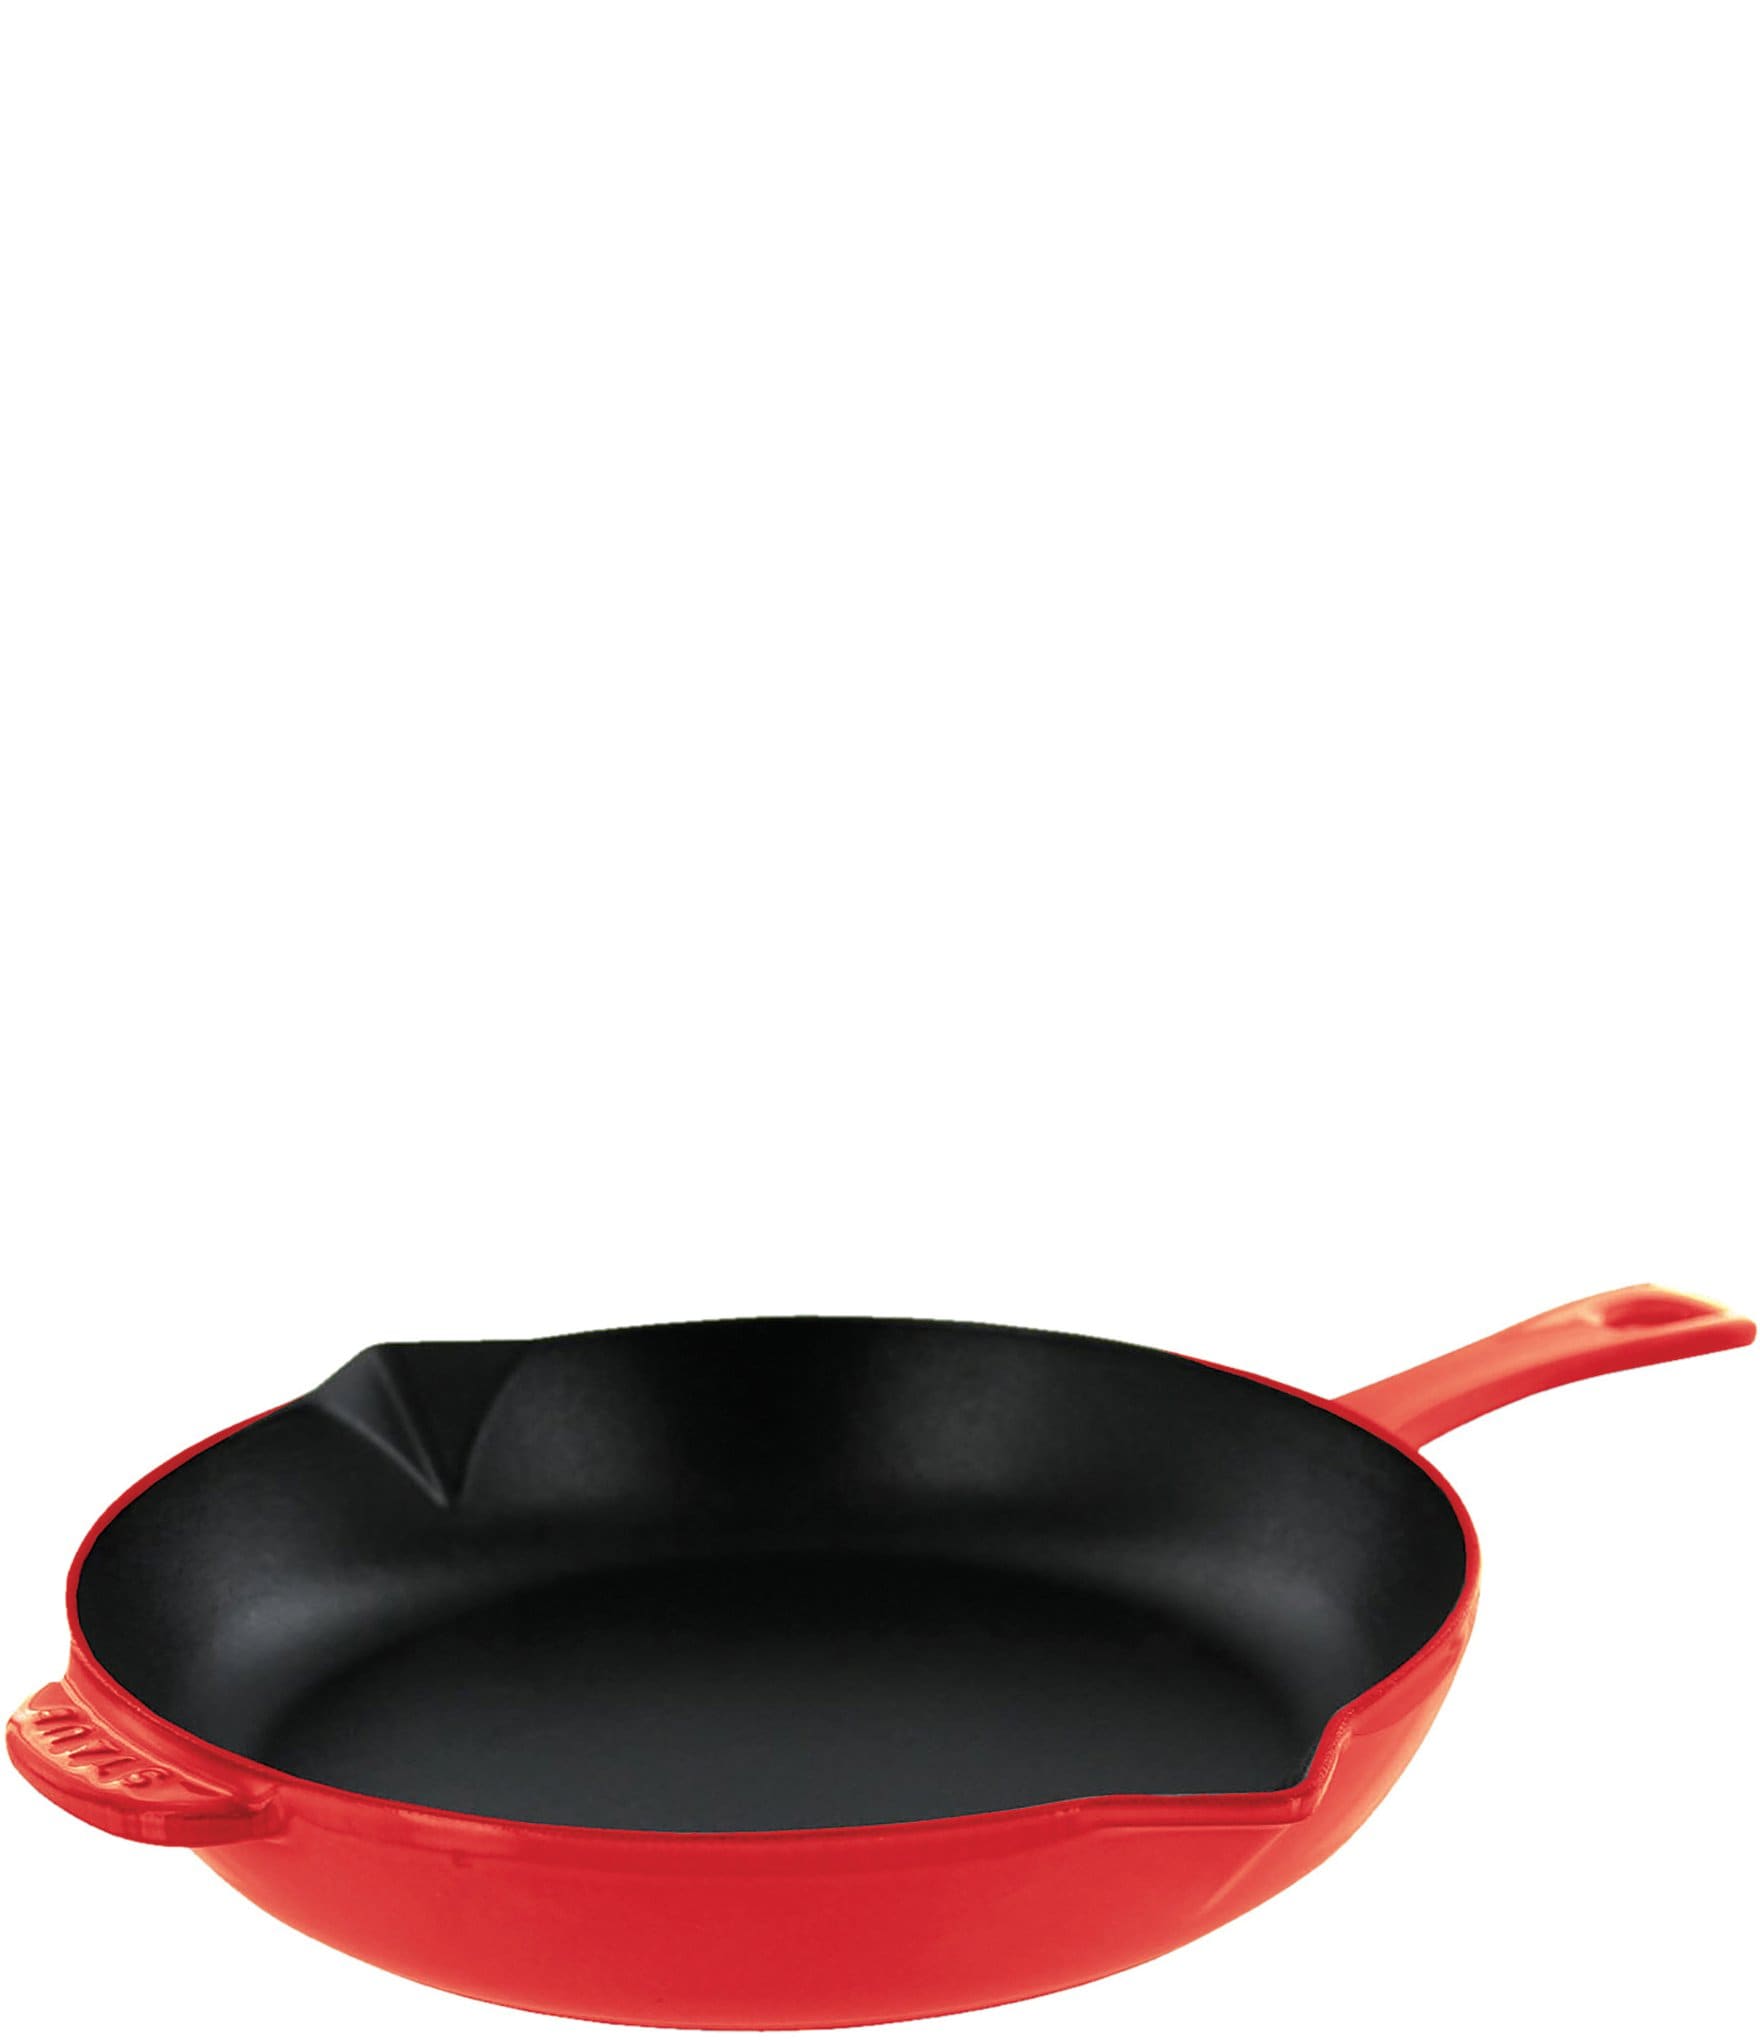 Non Stick Cookware Clearance, Discounts & Rollbacks 